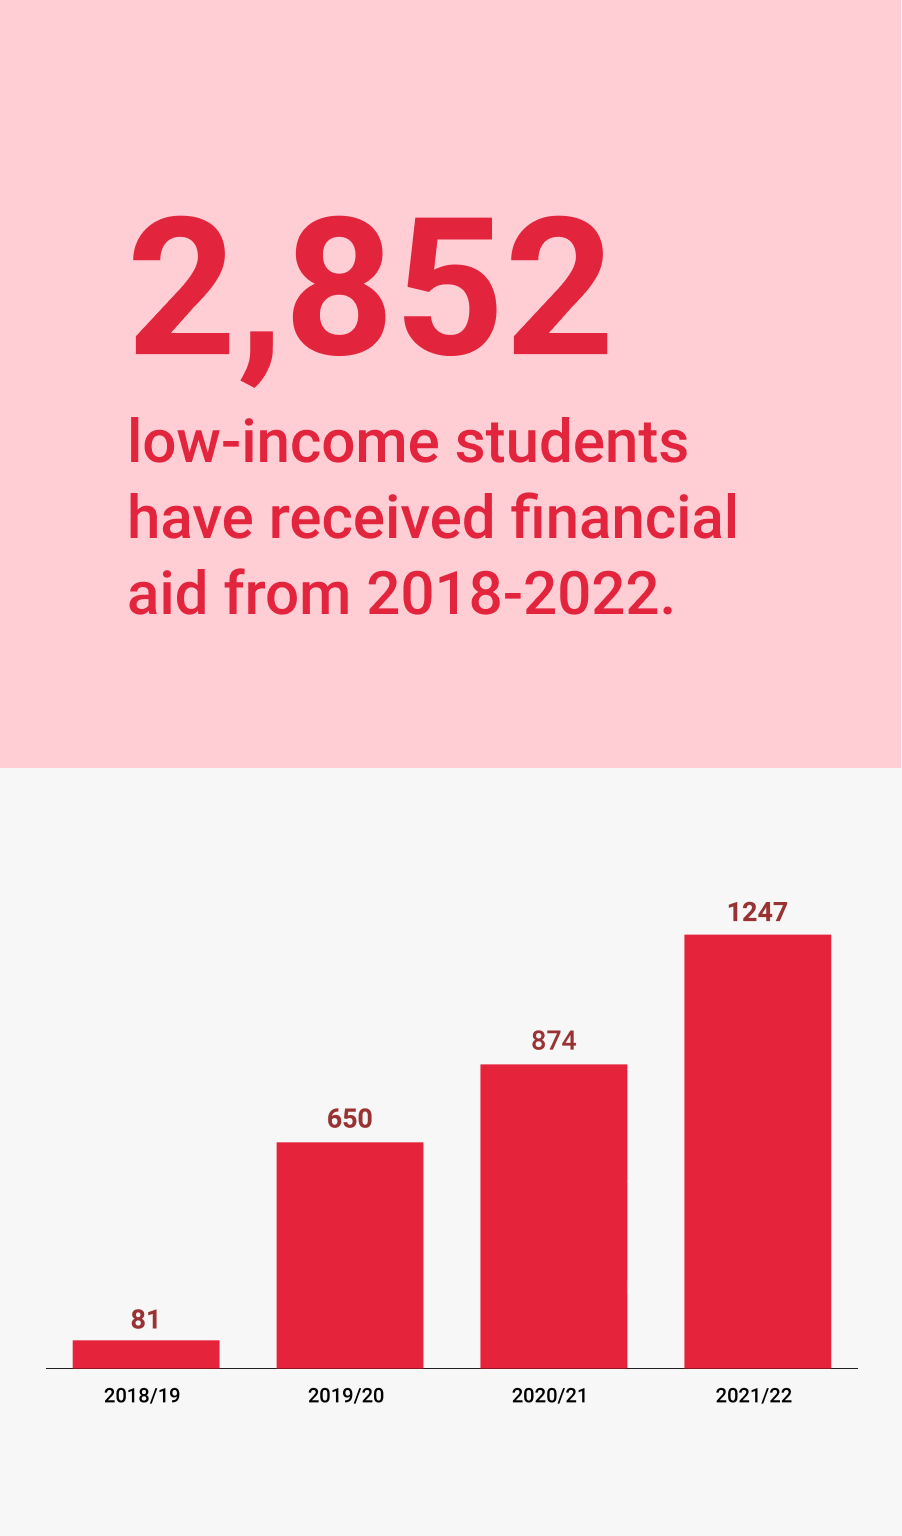 Infographic showing that 2,852 low-income students received financial aid from 2018-2022 